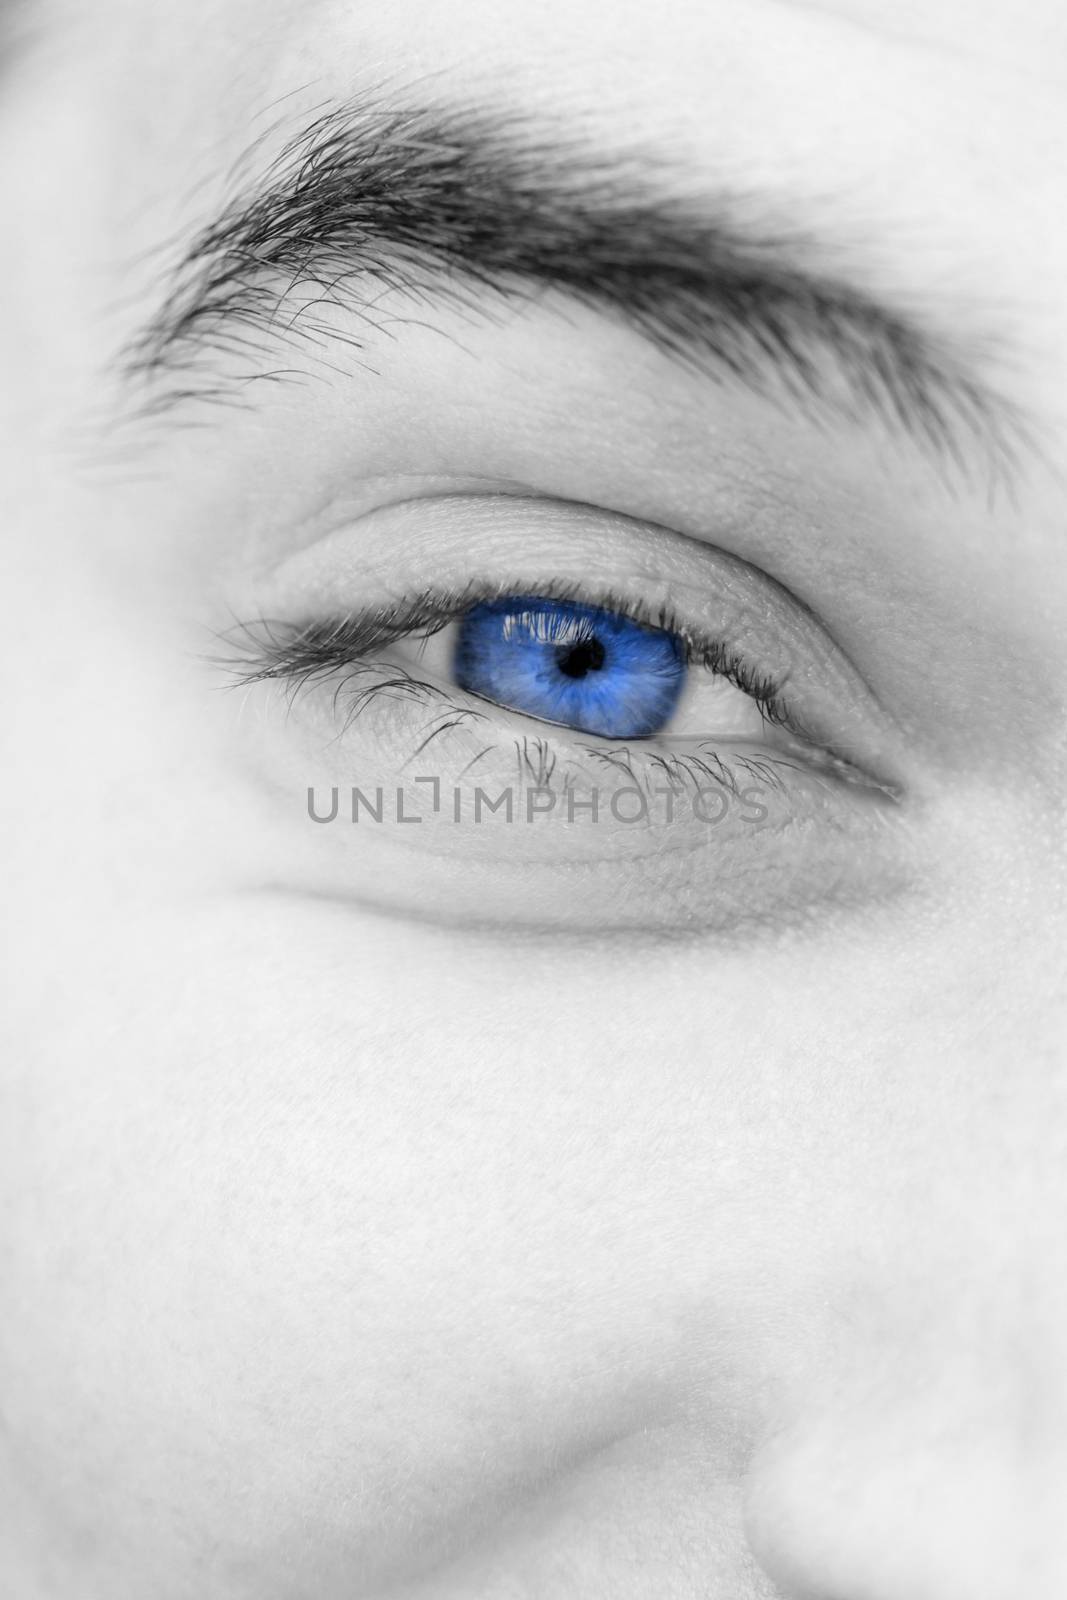 Young man's eyes by Nneirda